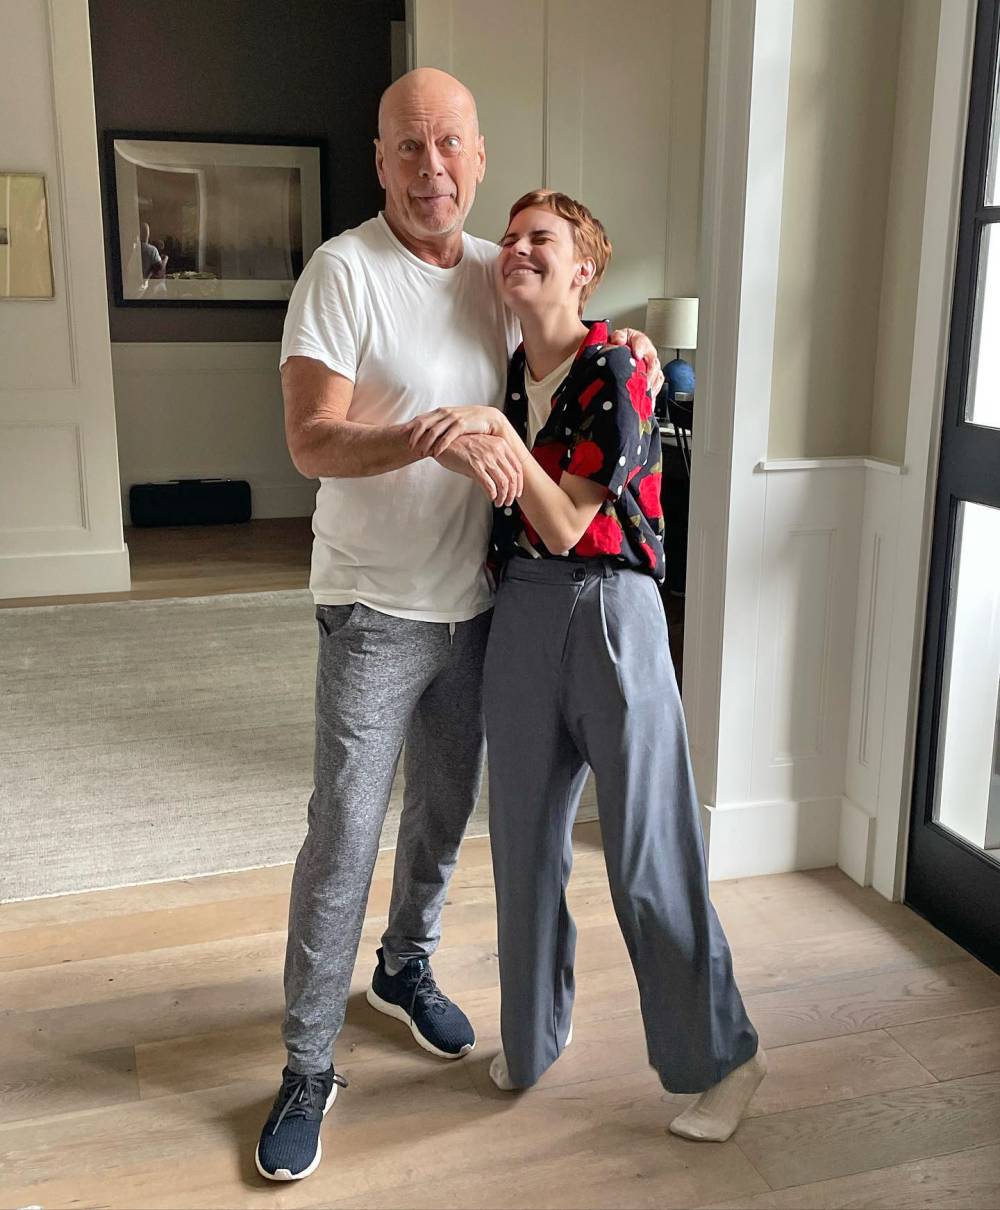 Tallulah Willis shared a series of sweet photos of her dad Bruce Willis